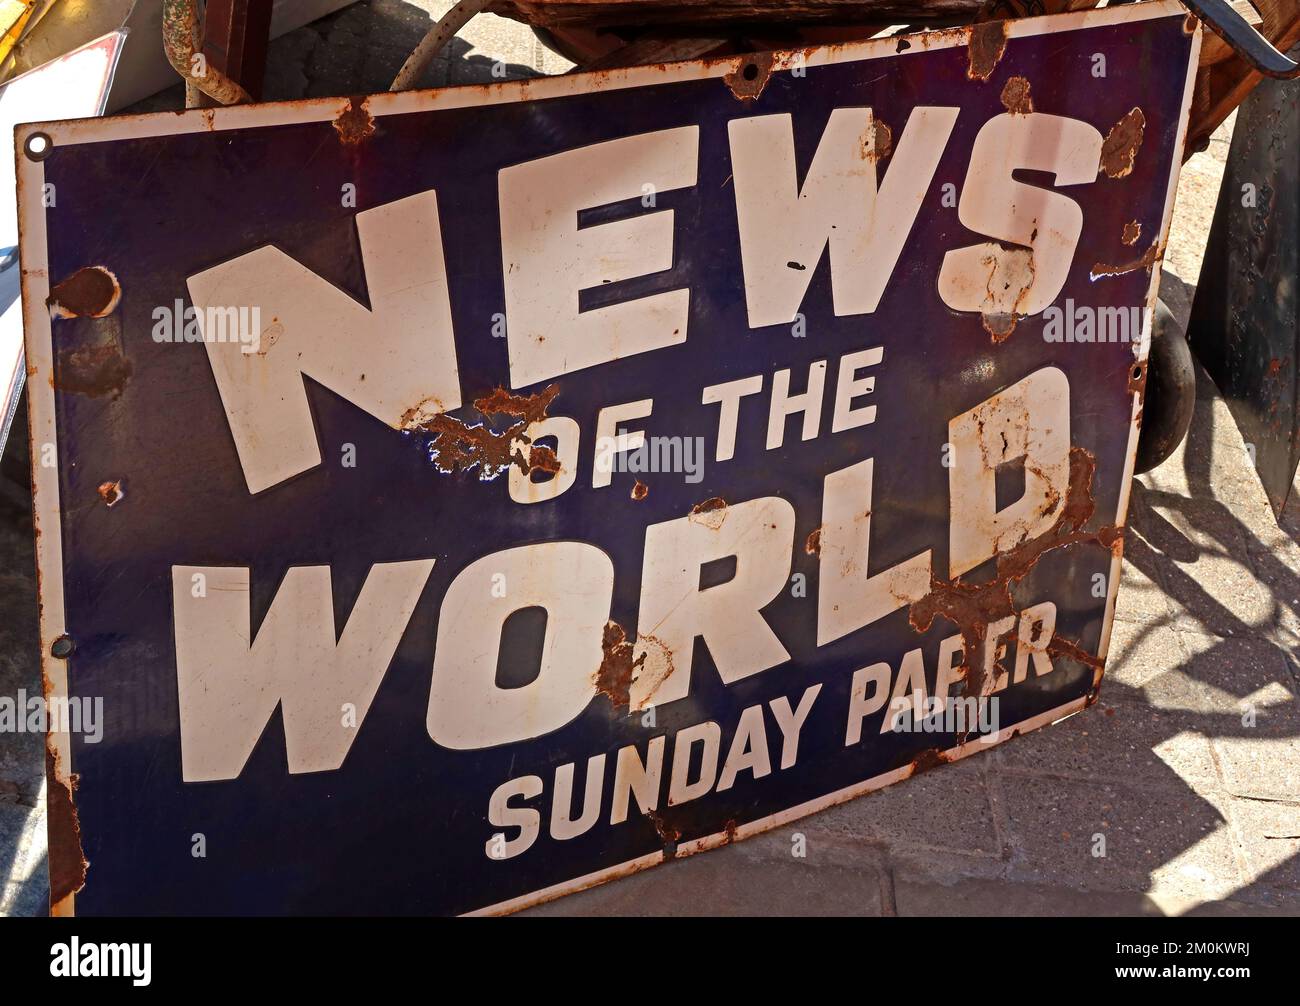 The News of The World, Sunday paper, metal sign Stock Photo